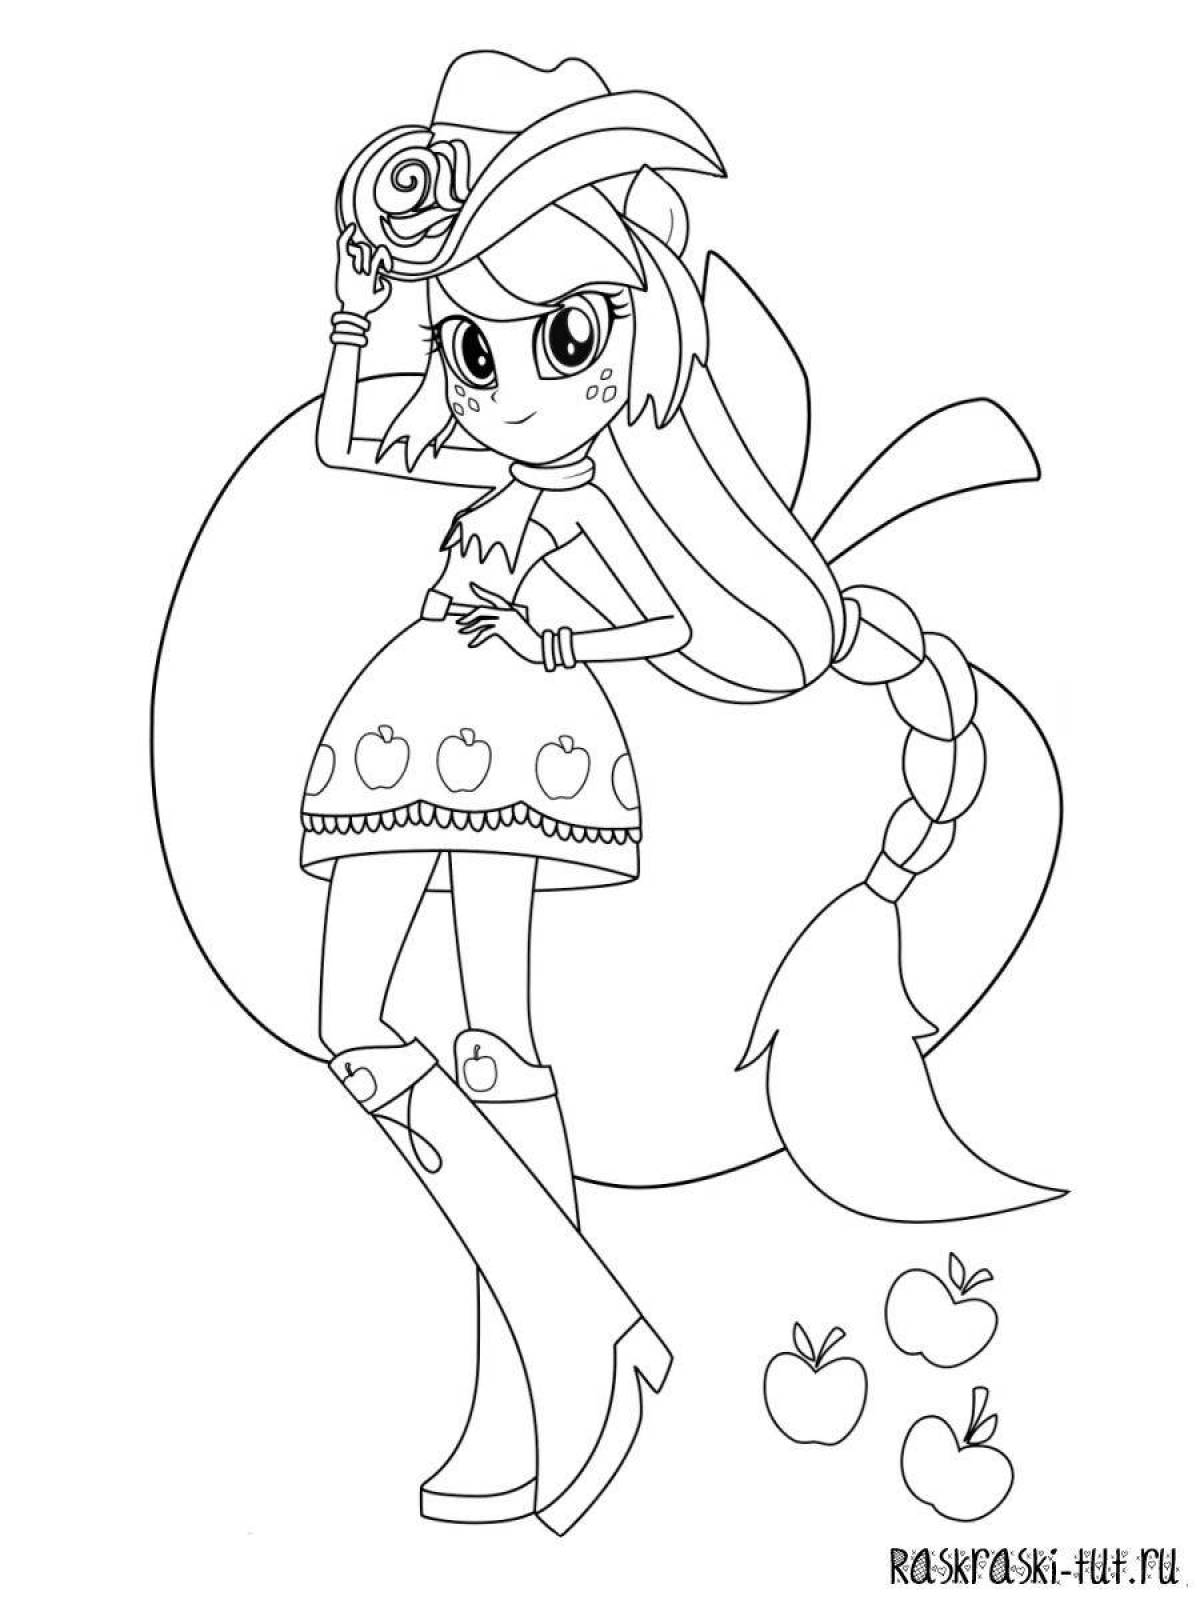 Fun little pony girls coloring pages